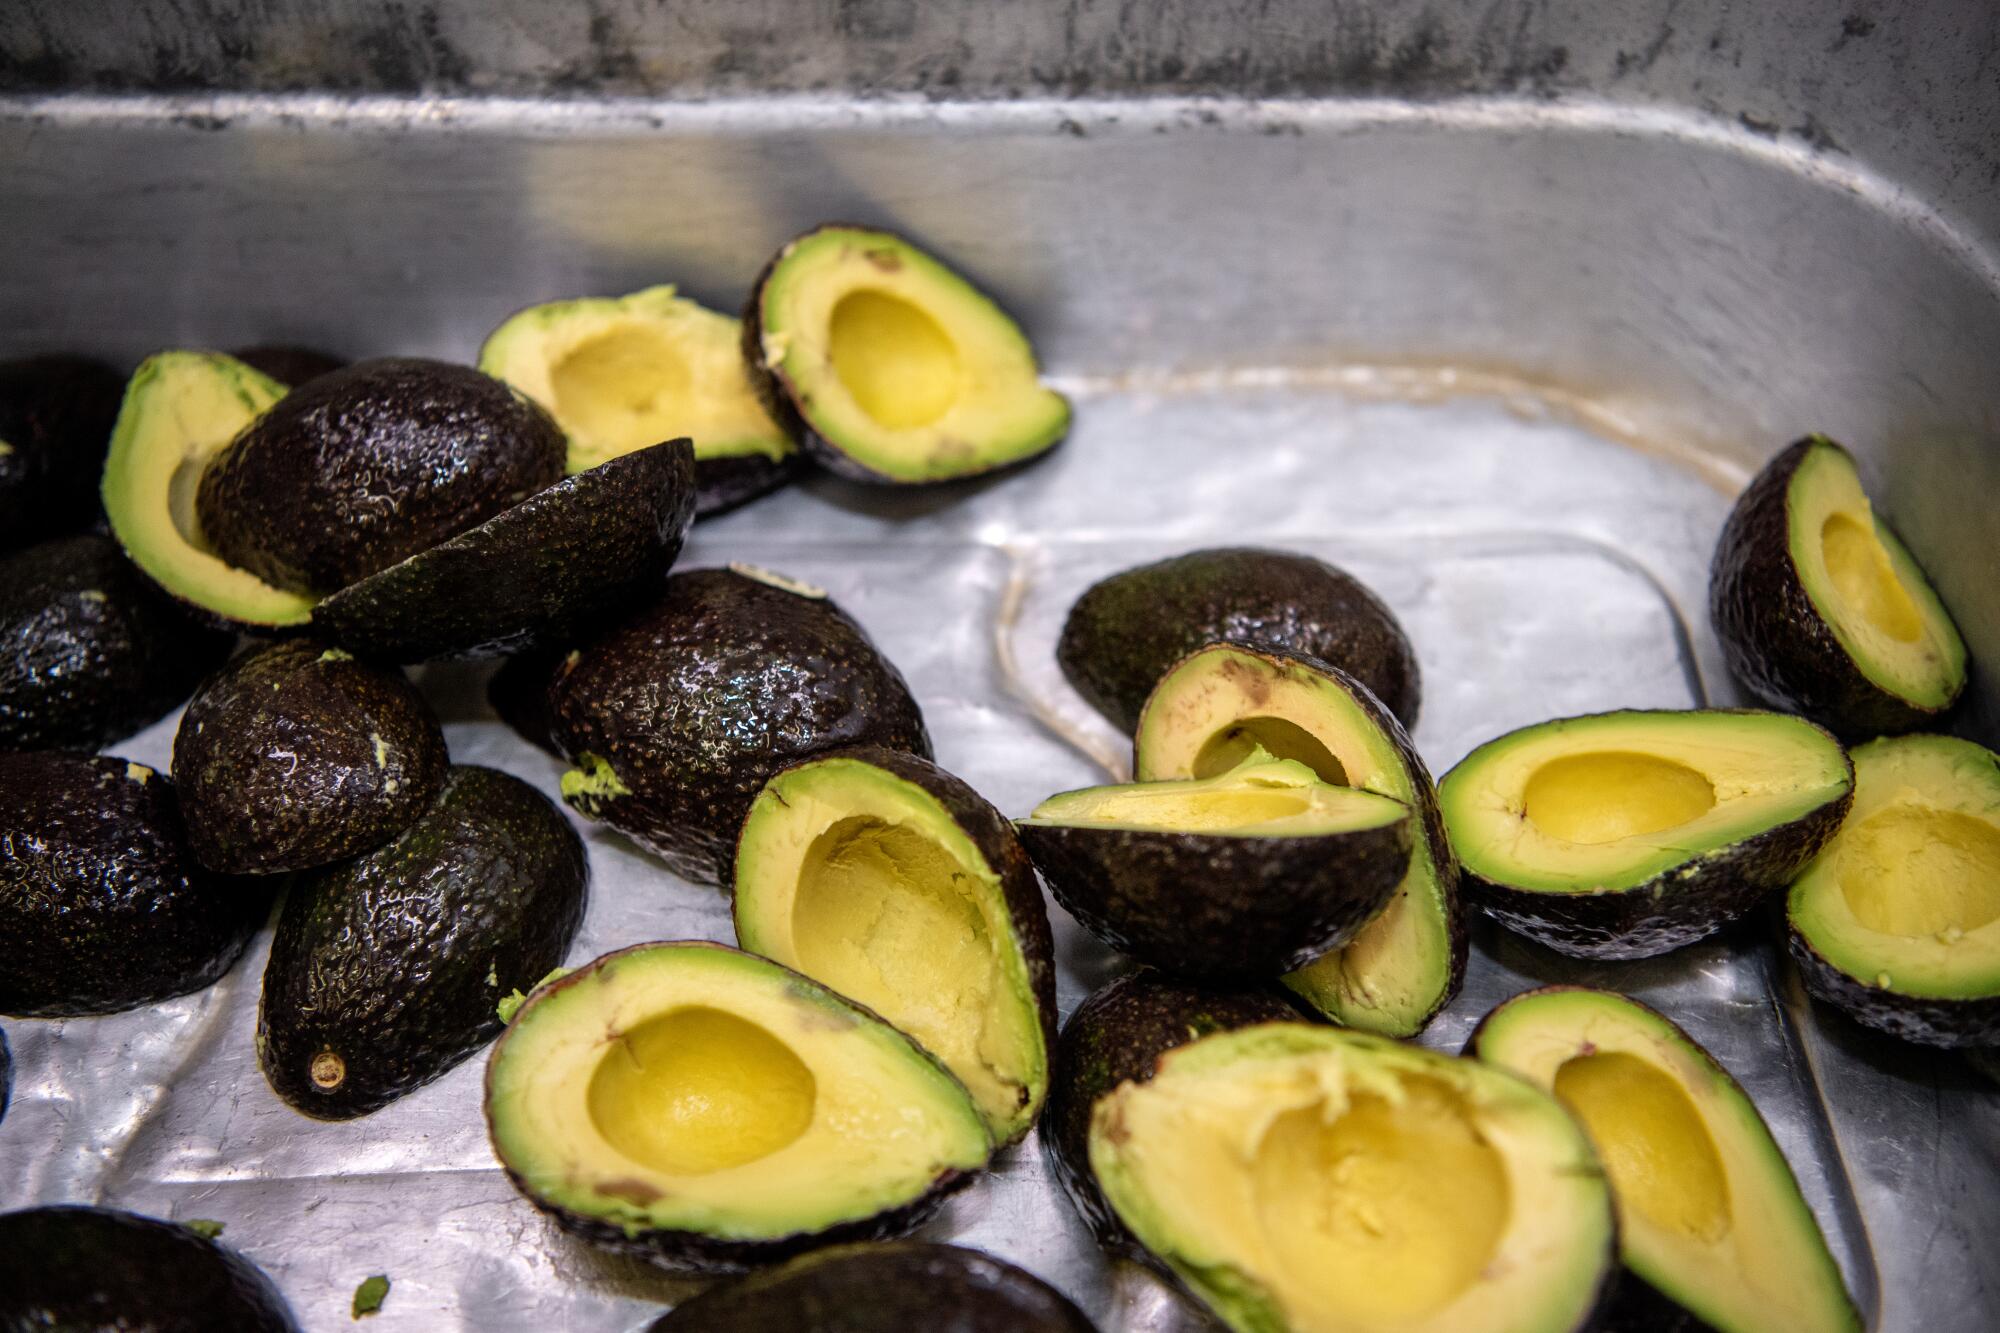 Avocados for guacamole are prepped at Tito's Tacos in Culver City in 2019.